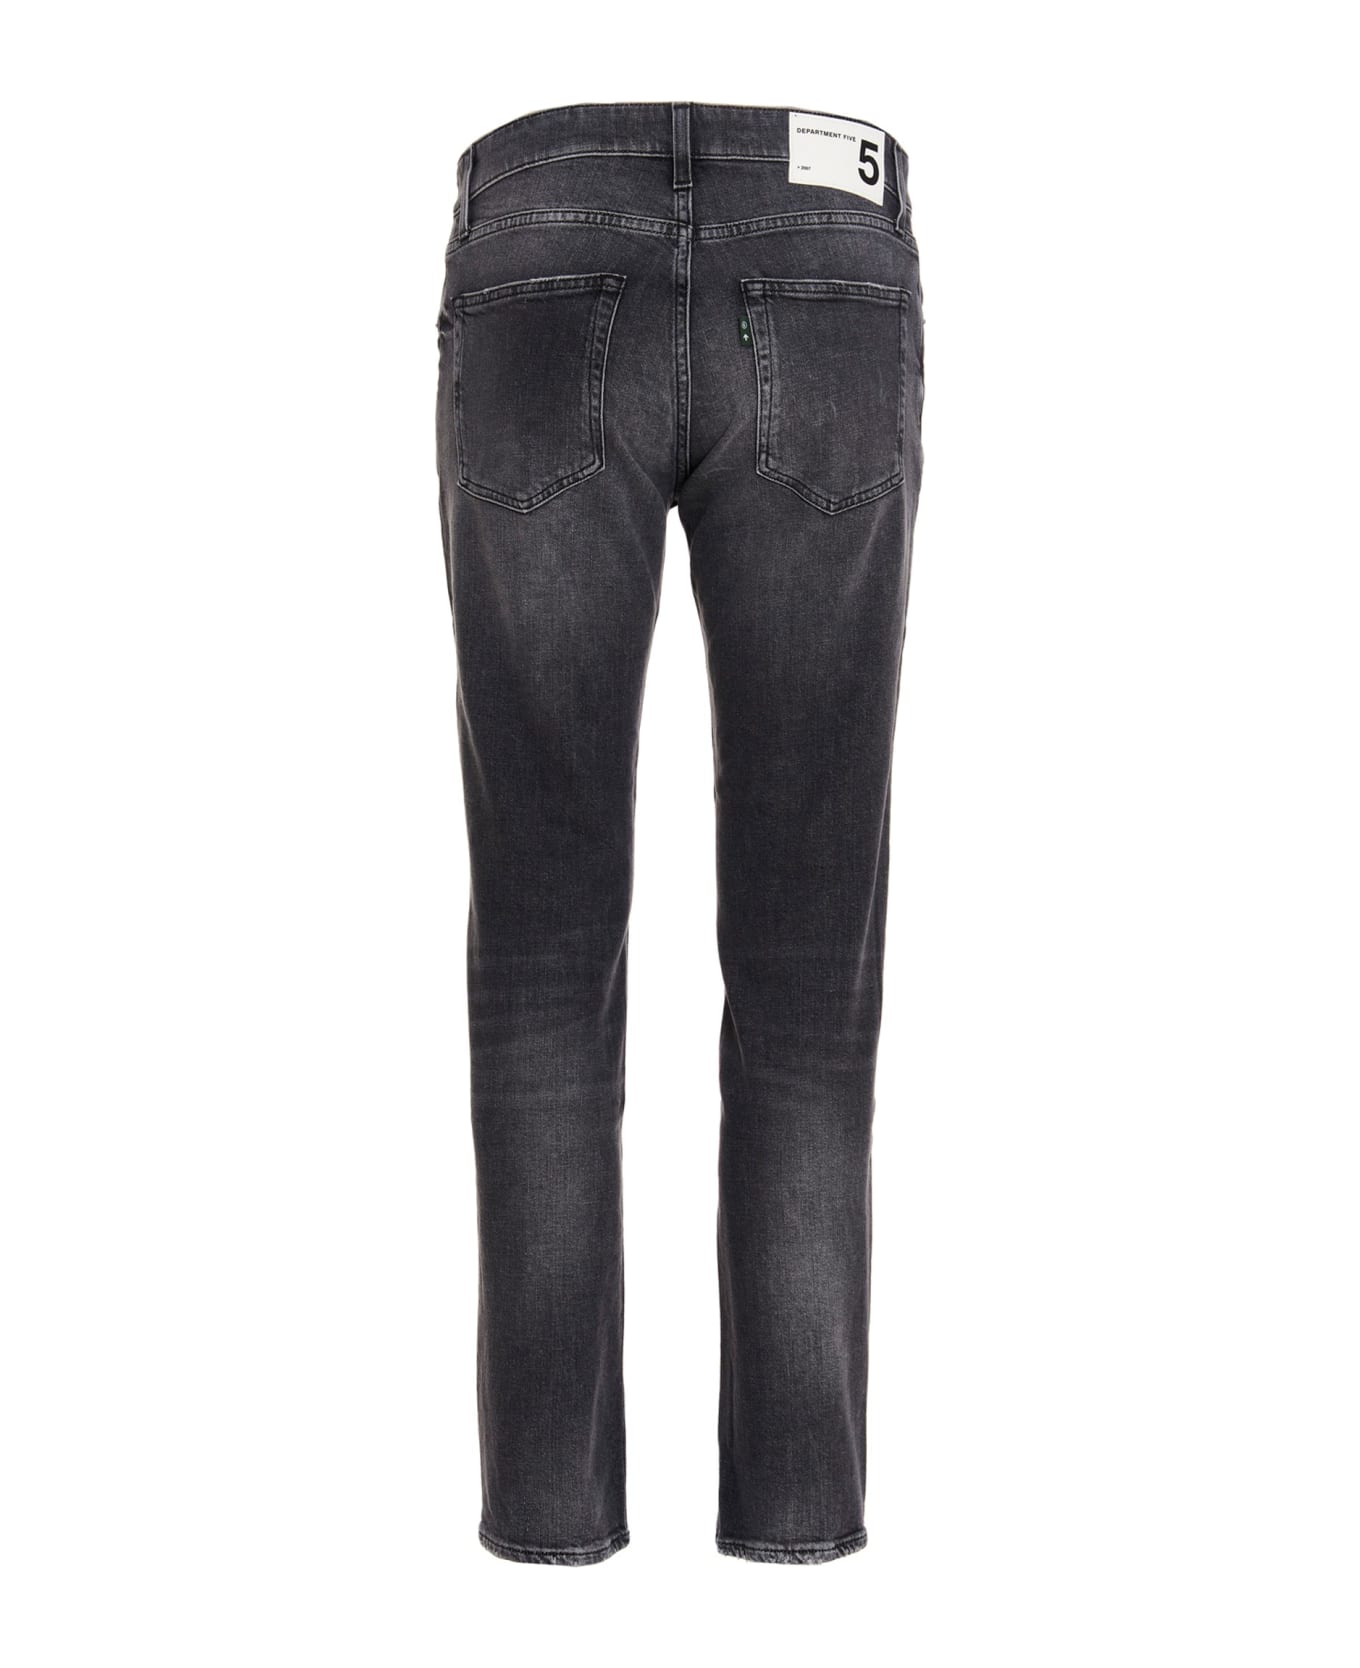 Department Five 'skeith' Jeans - Gray